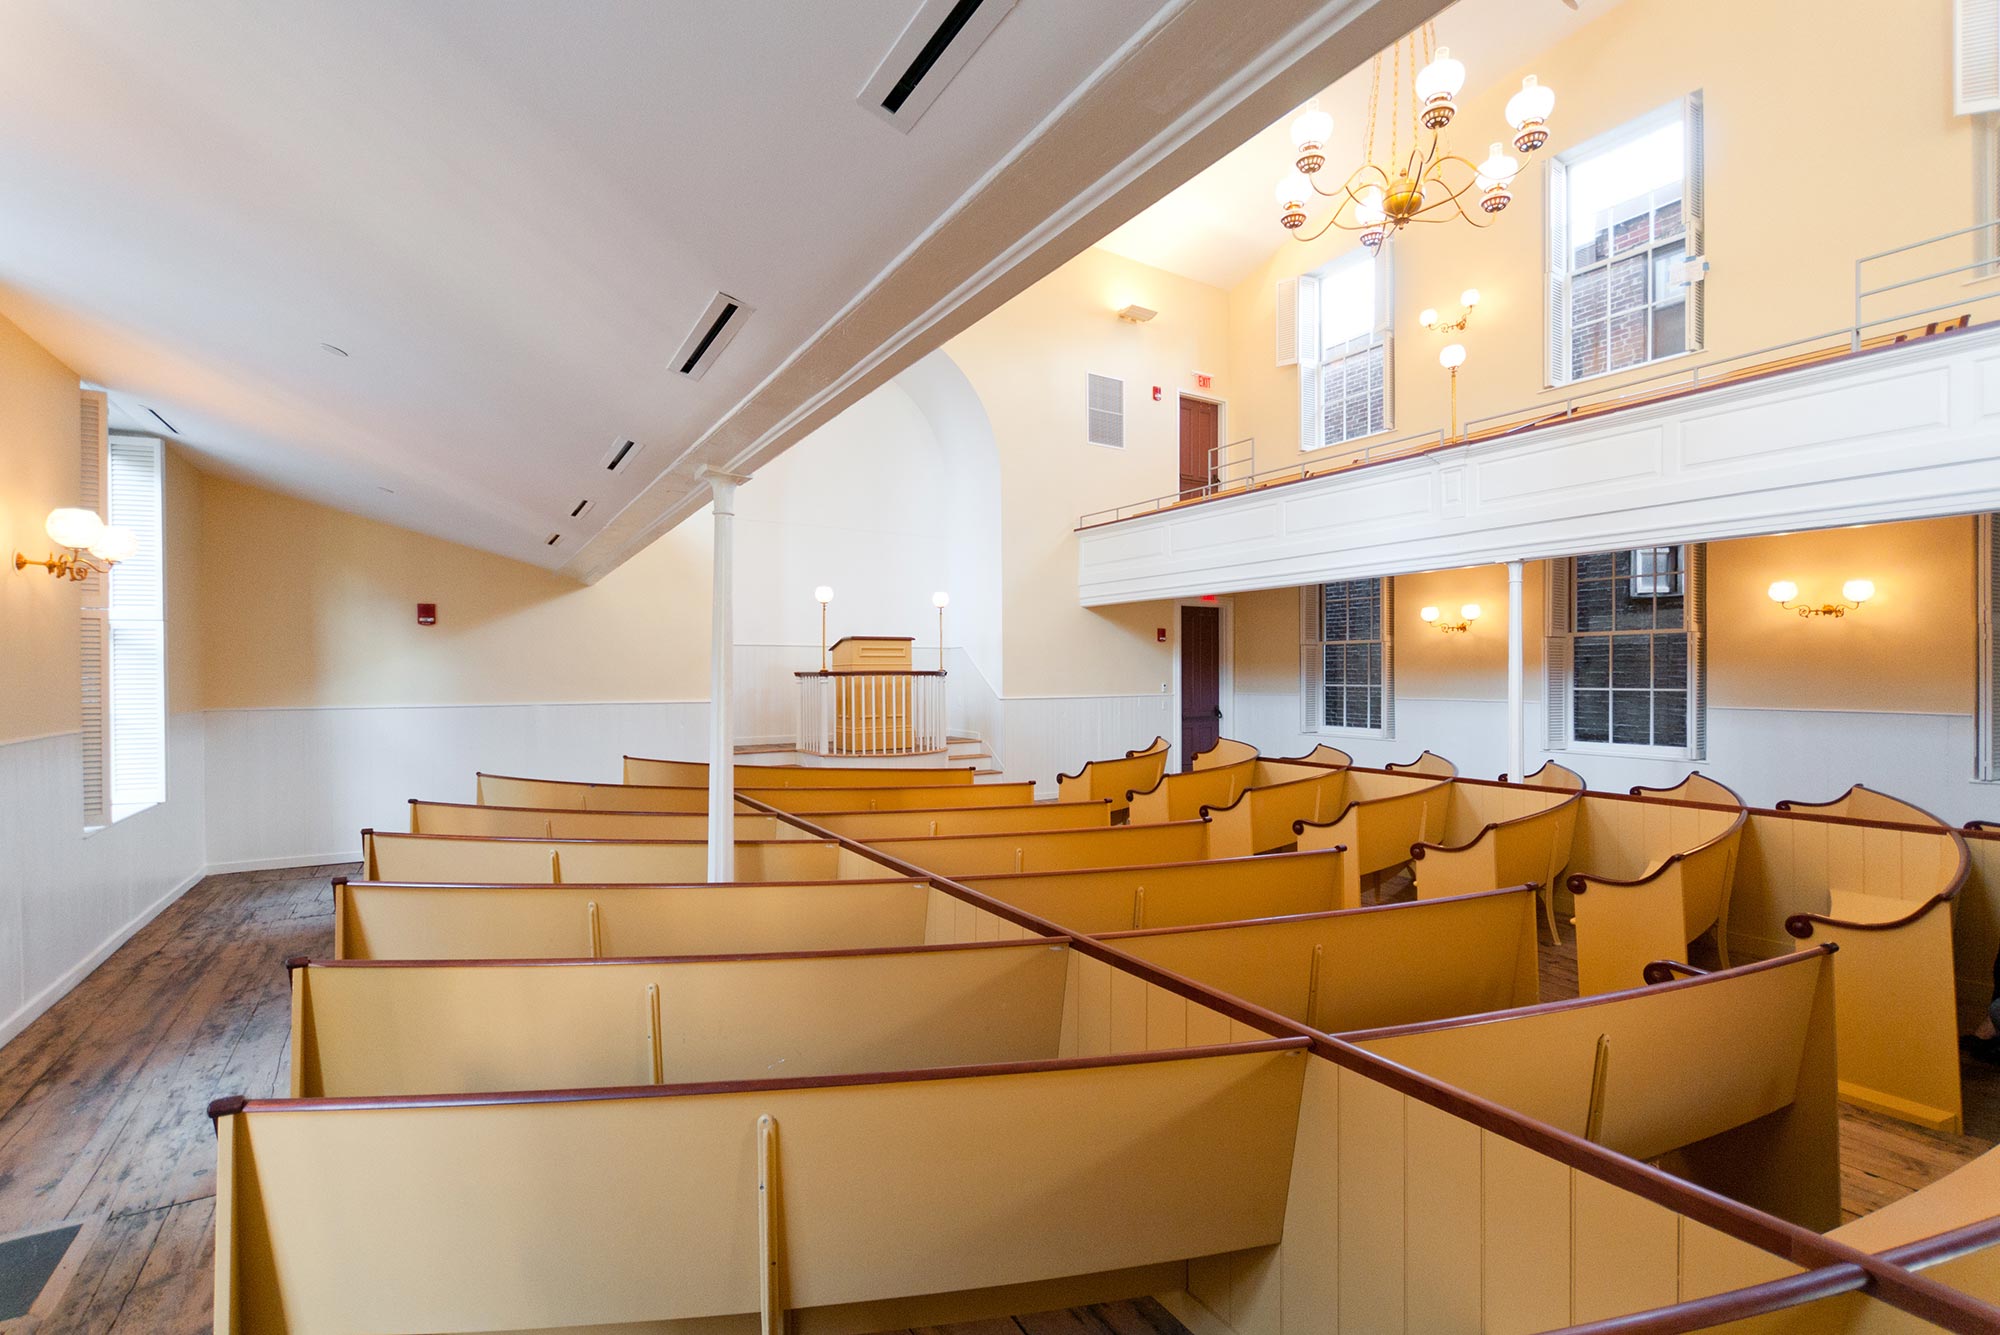 Photo inside the African Meeting House on Beacon Hill, it has wooden pews and a pulpit at the front, with balcony seating on the sides and a chandelier with electric lights.